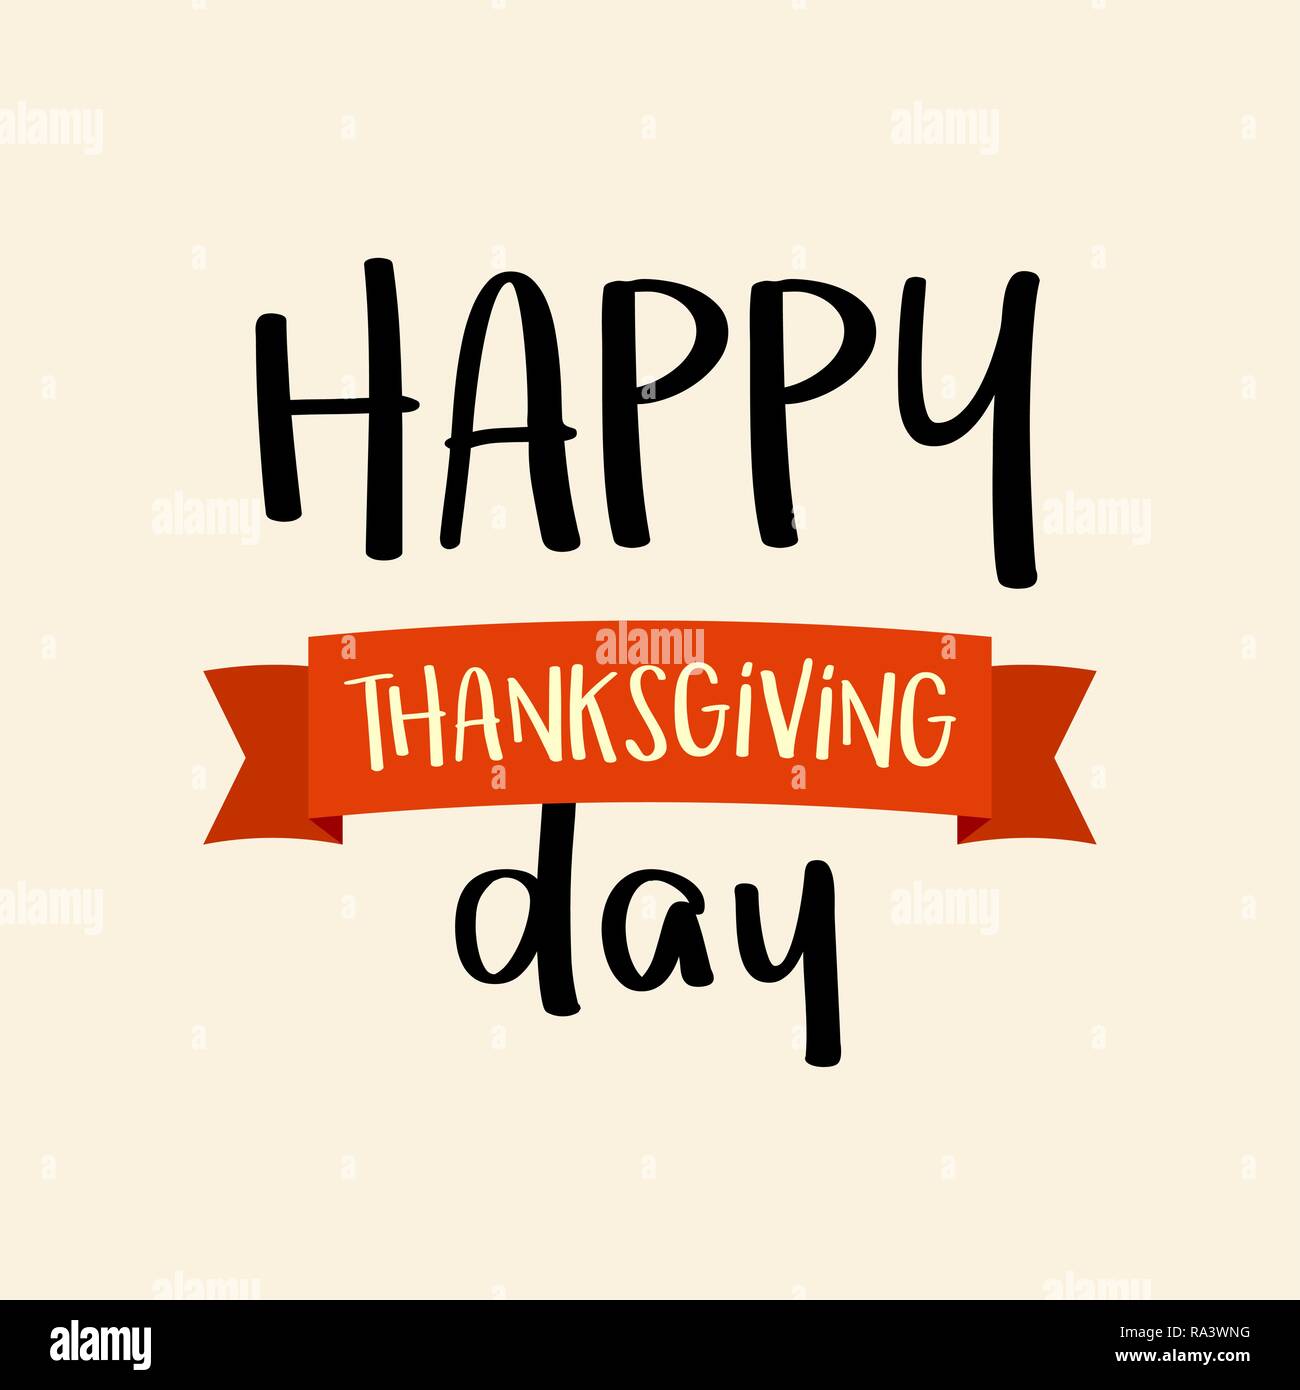 Happy Thanksgiving day vector greeting card. Flat celebration illustration Stock Vector